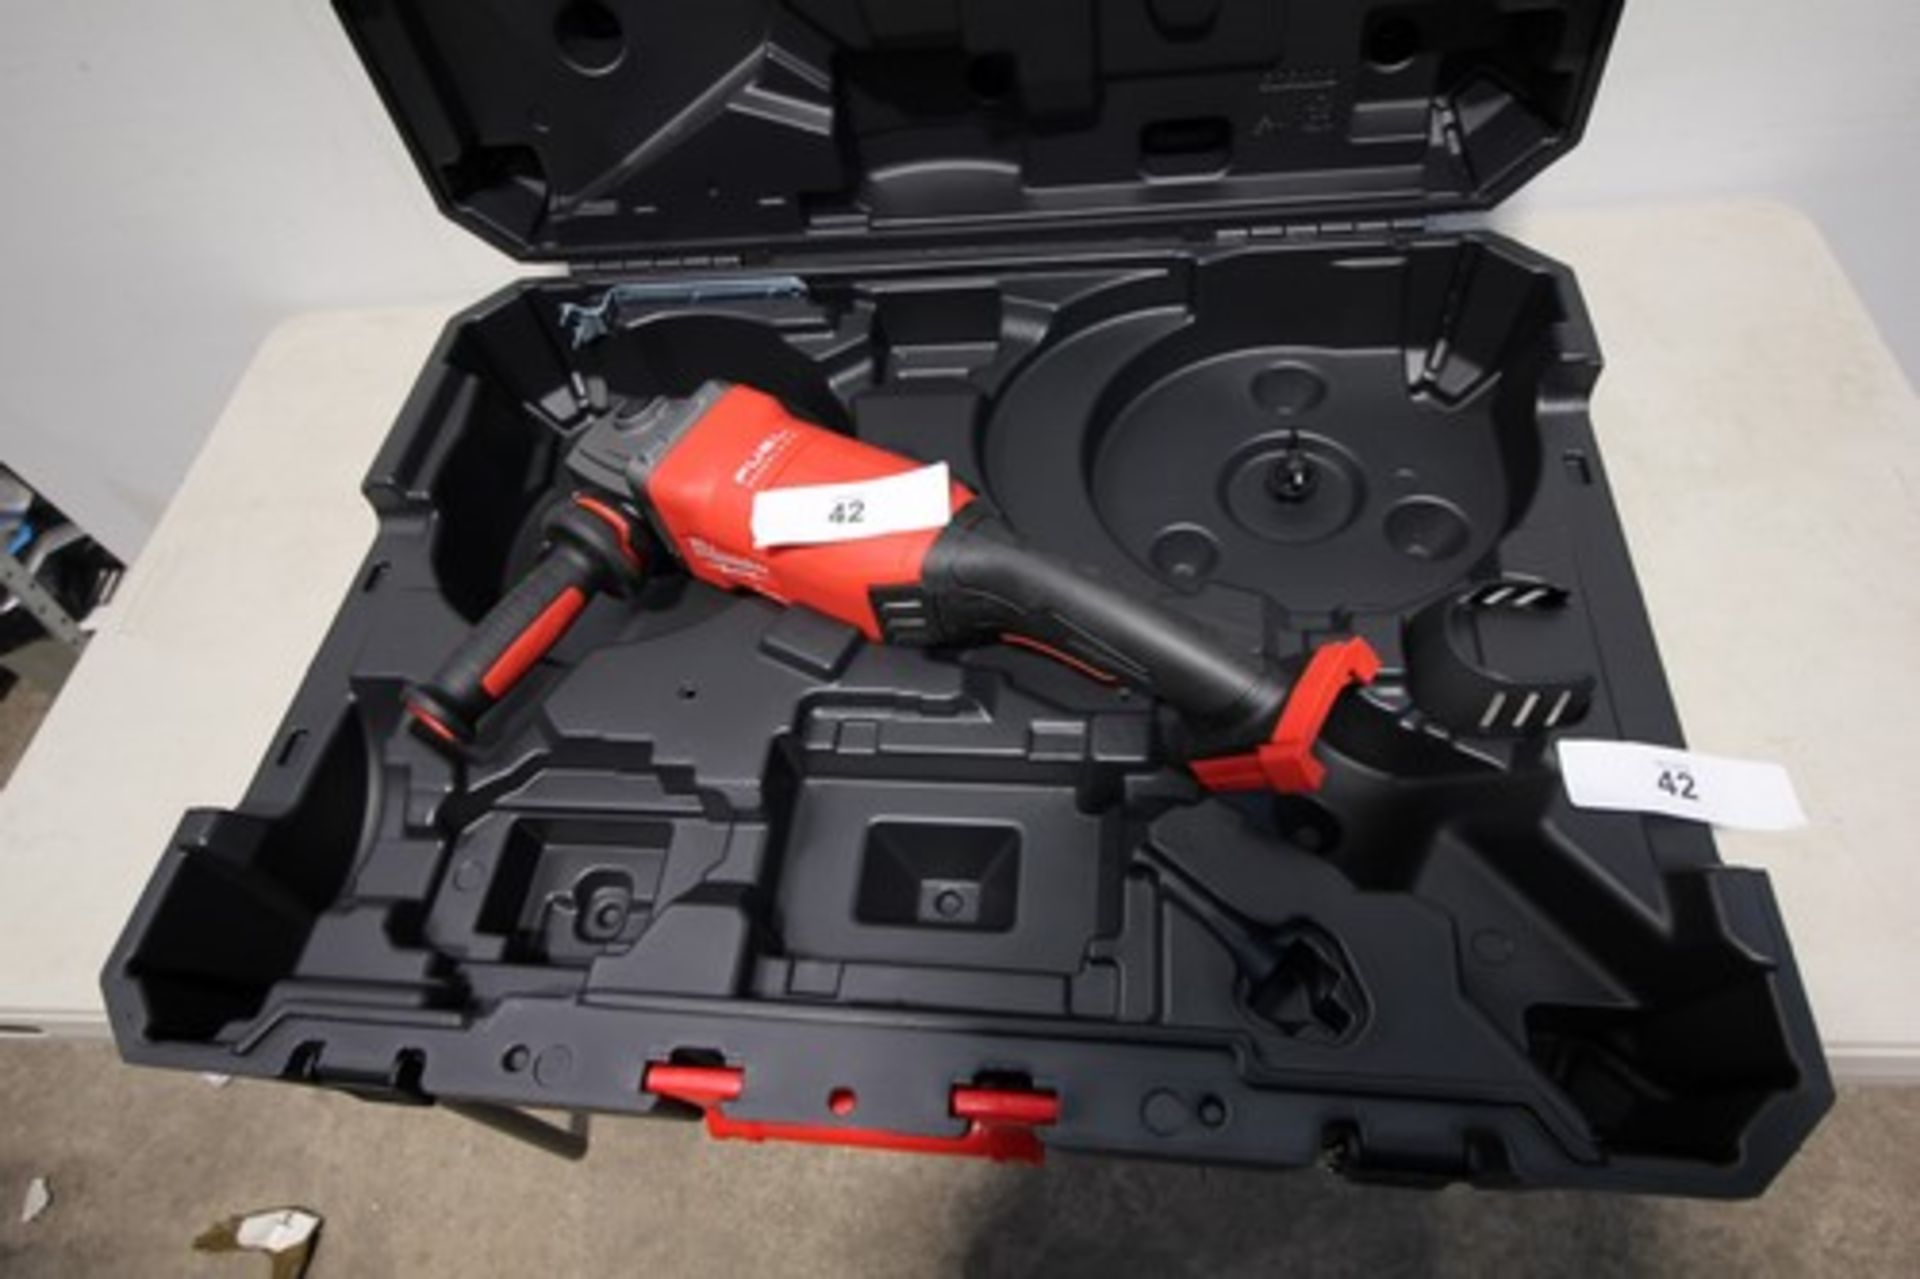 1 x Milwaukee M18 fuel cordless angle grinder (body only),no battery or charger, model FLAG230XPDB- - Image 2 of 2